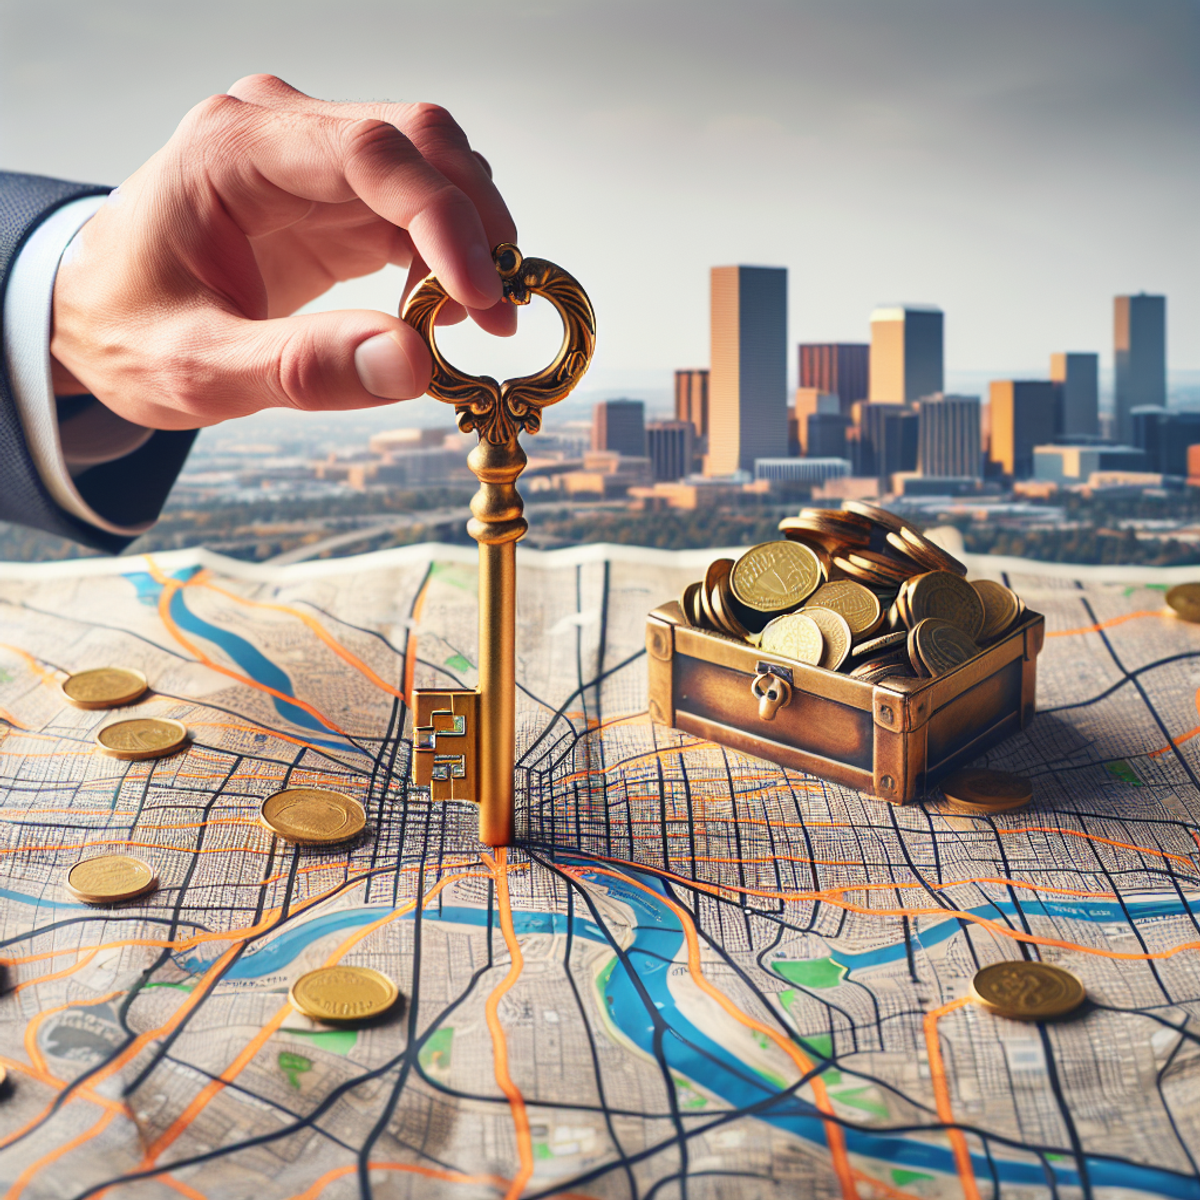 Golden key turning on a paper map with cityscape in the background.